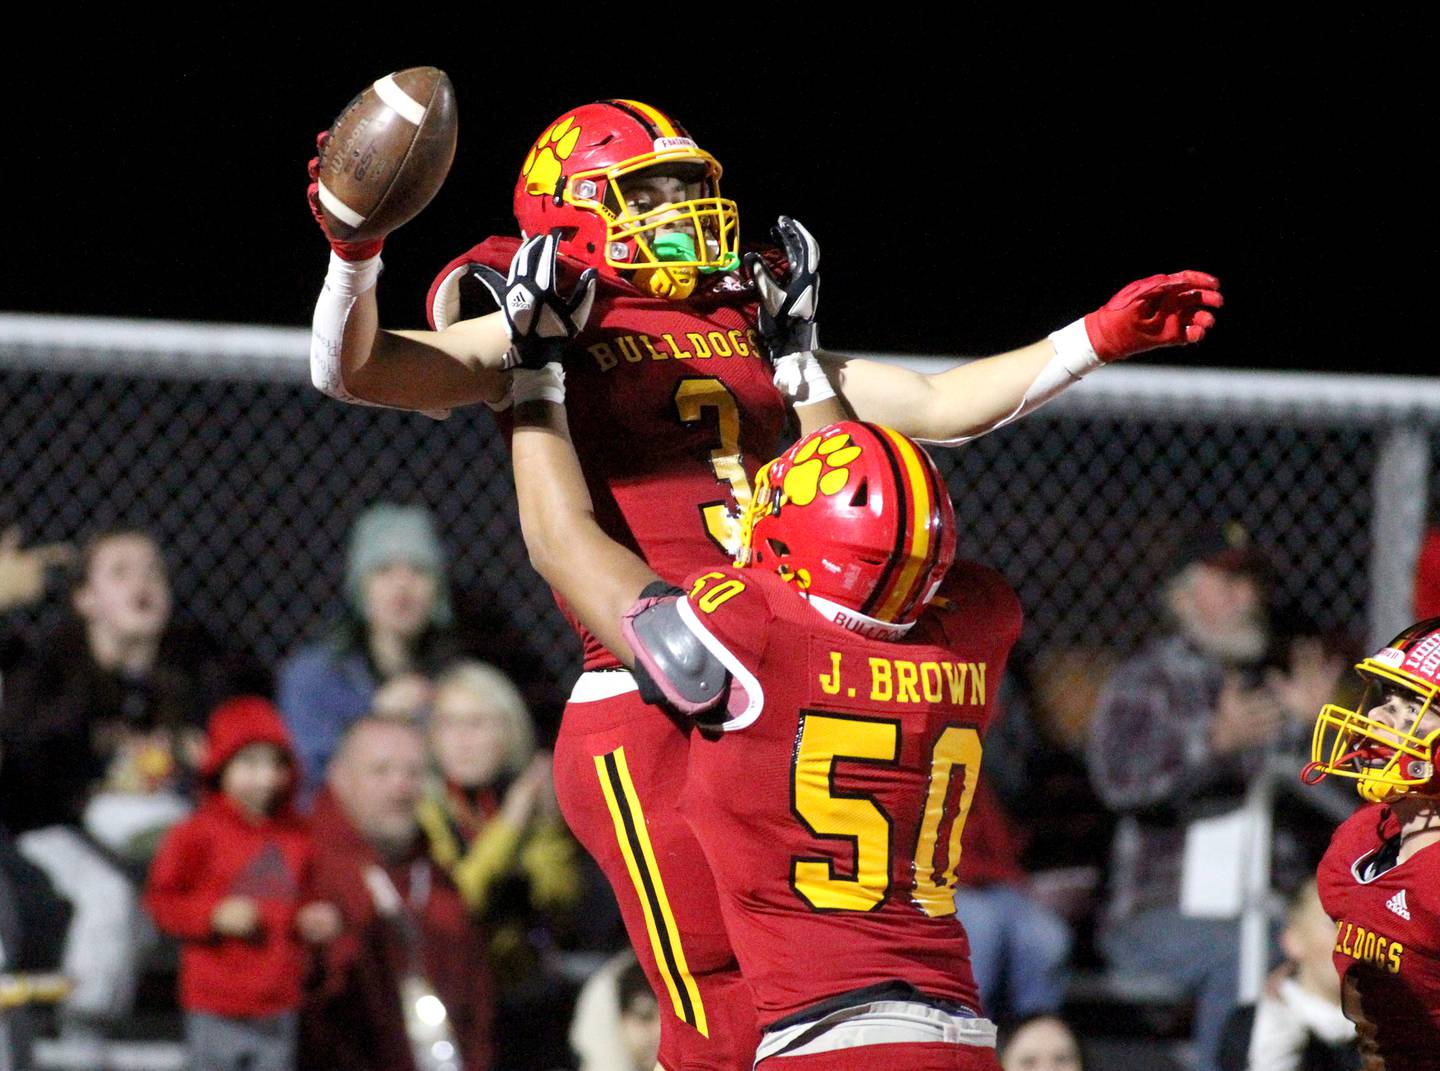 Batavia’s Jonathan Brown lifts teammate Ryan Whitwell following Whitwell’s touchdown in the second quarter during a game at Batavia on Friday, Oct. 21, 2022.